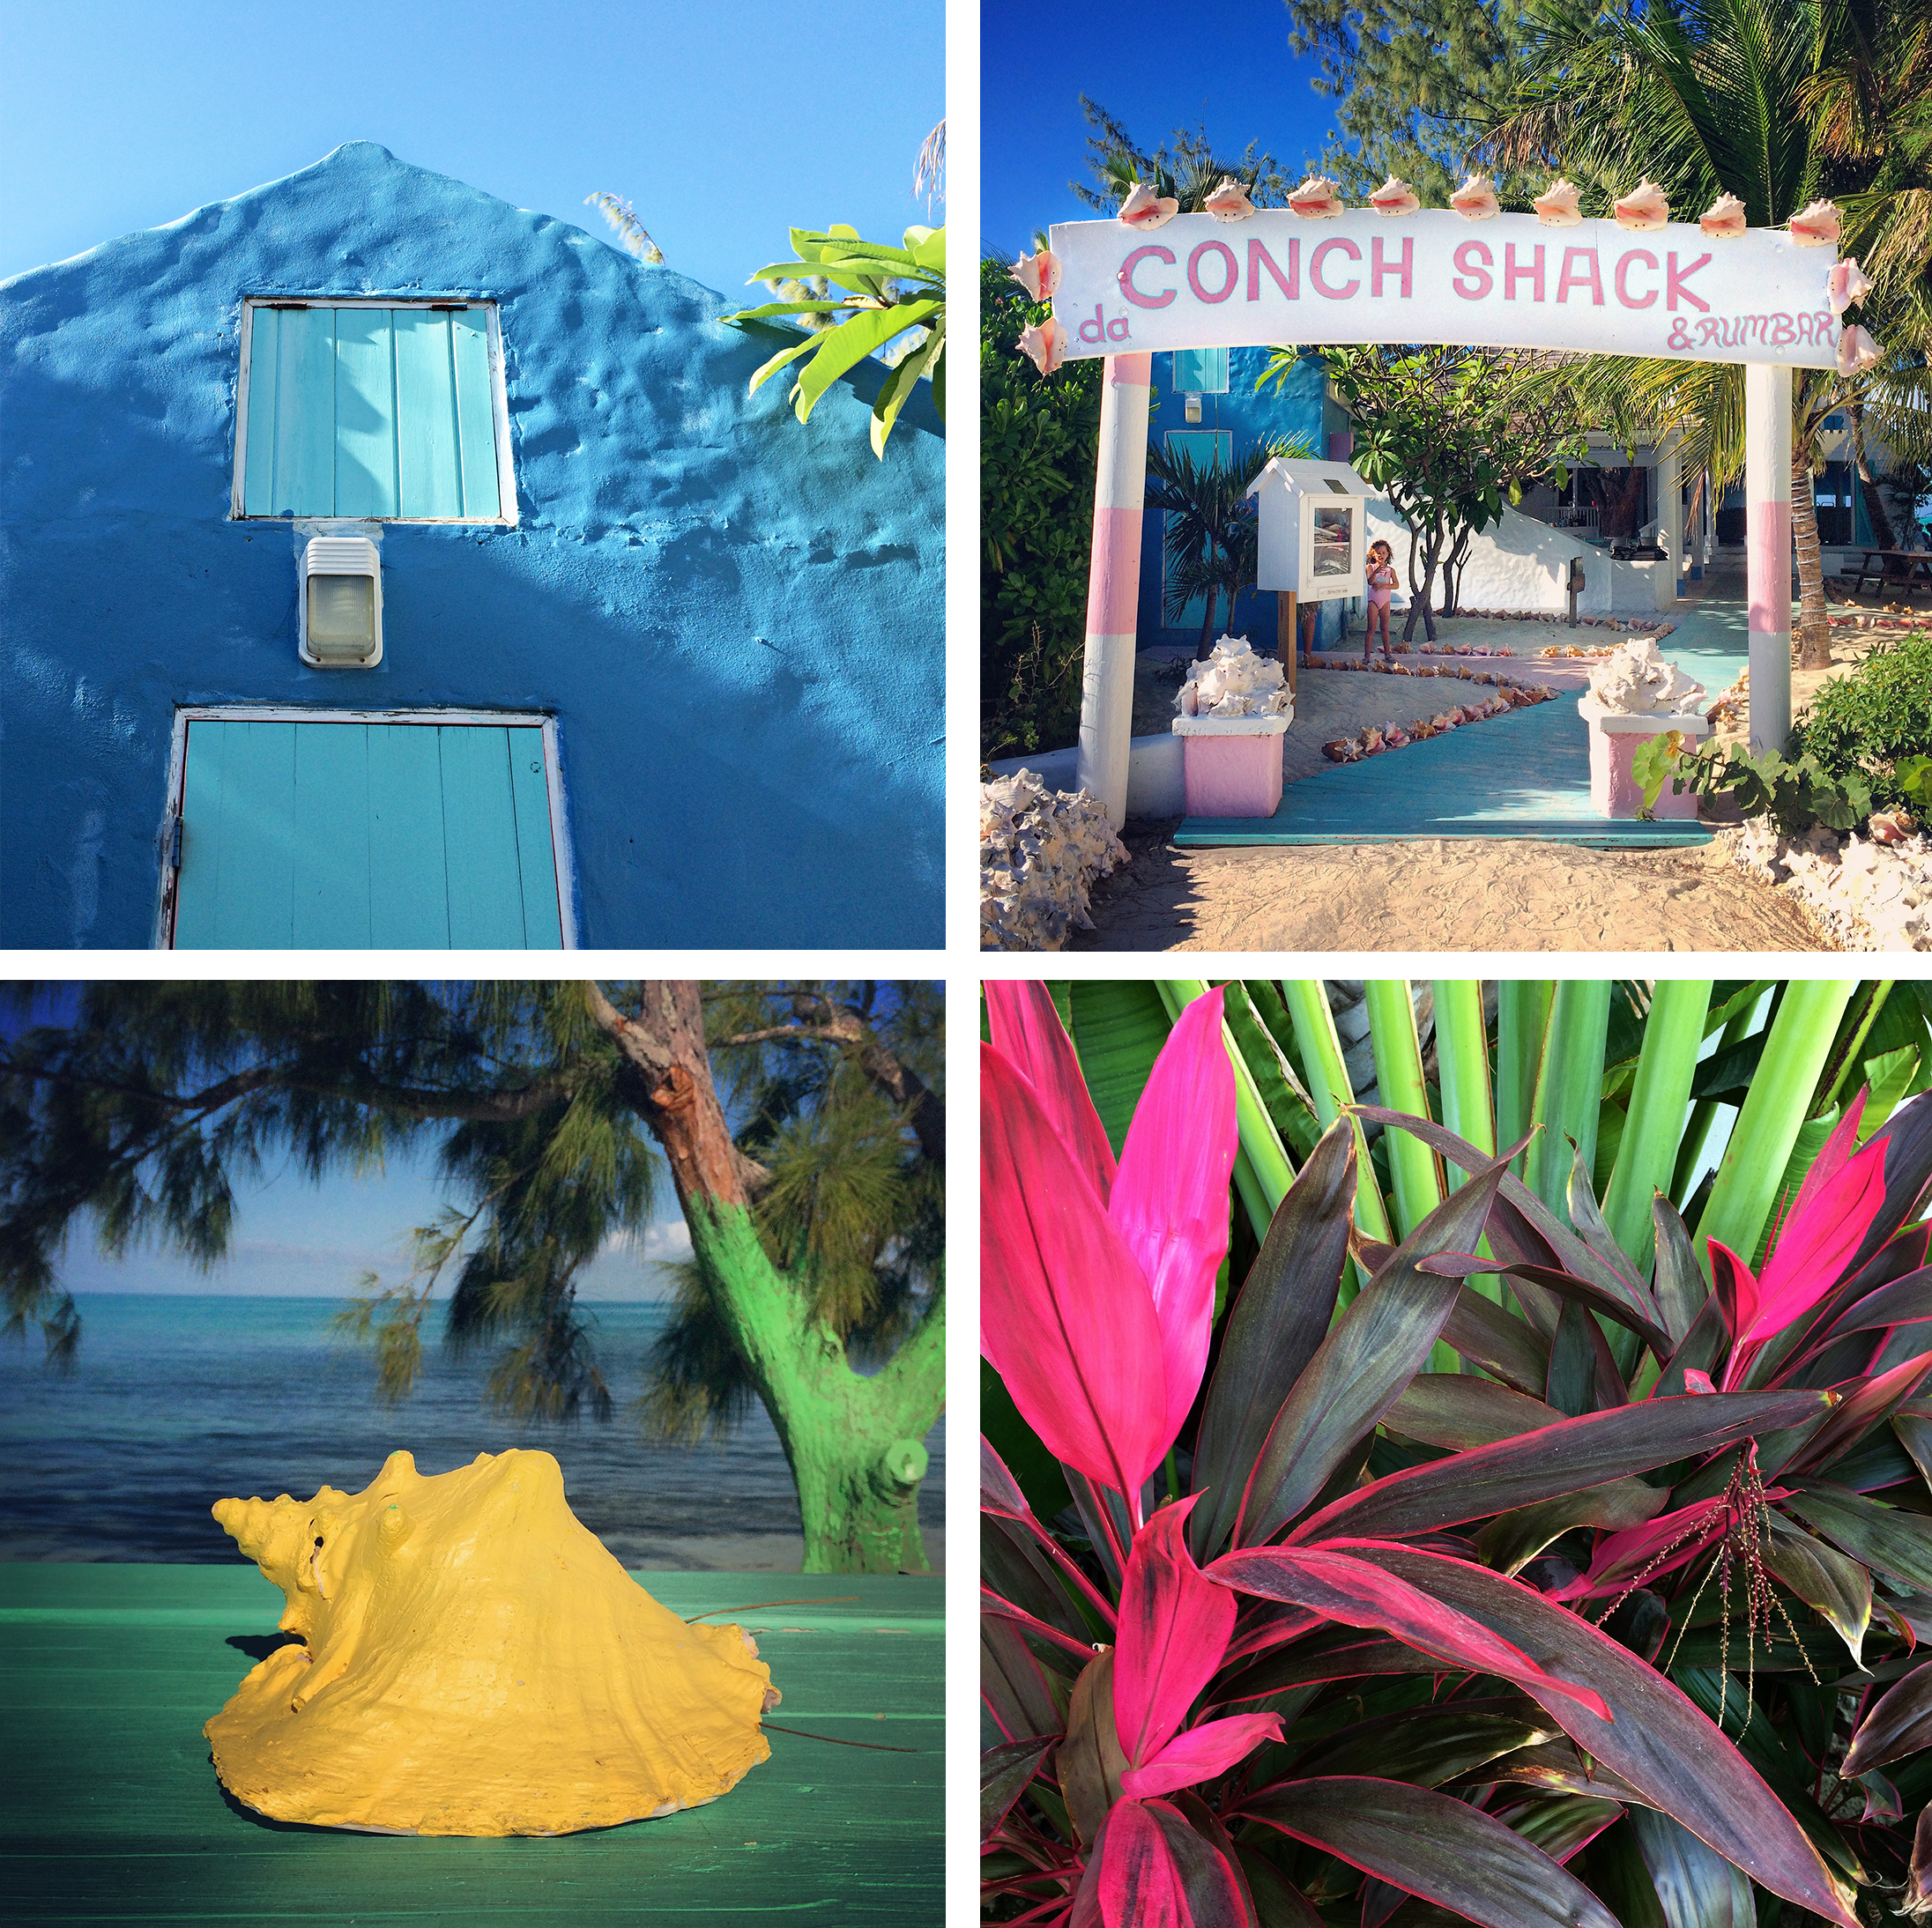 Turks and Caicos Travel Guide